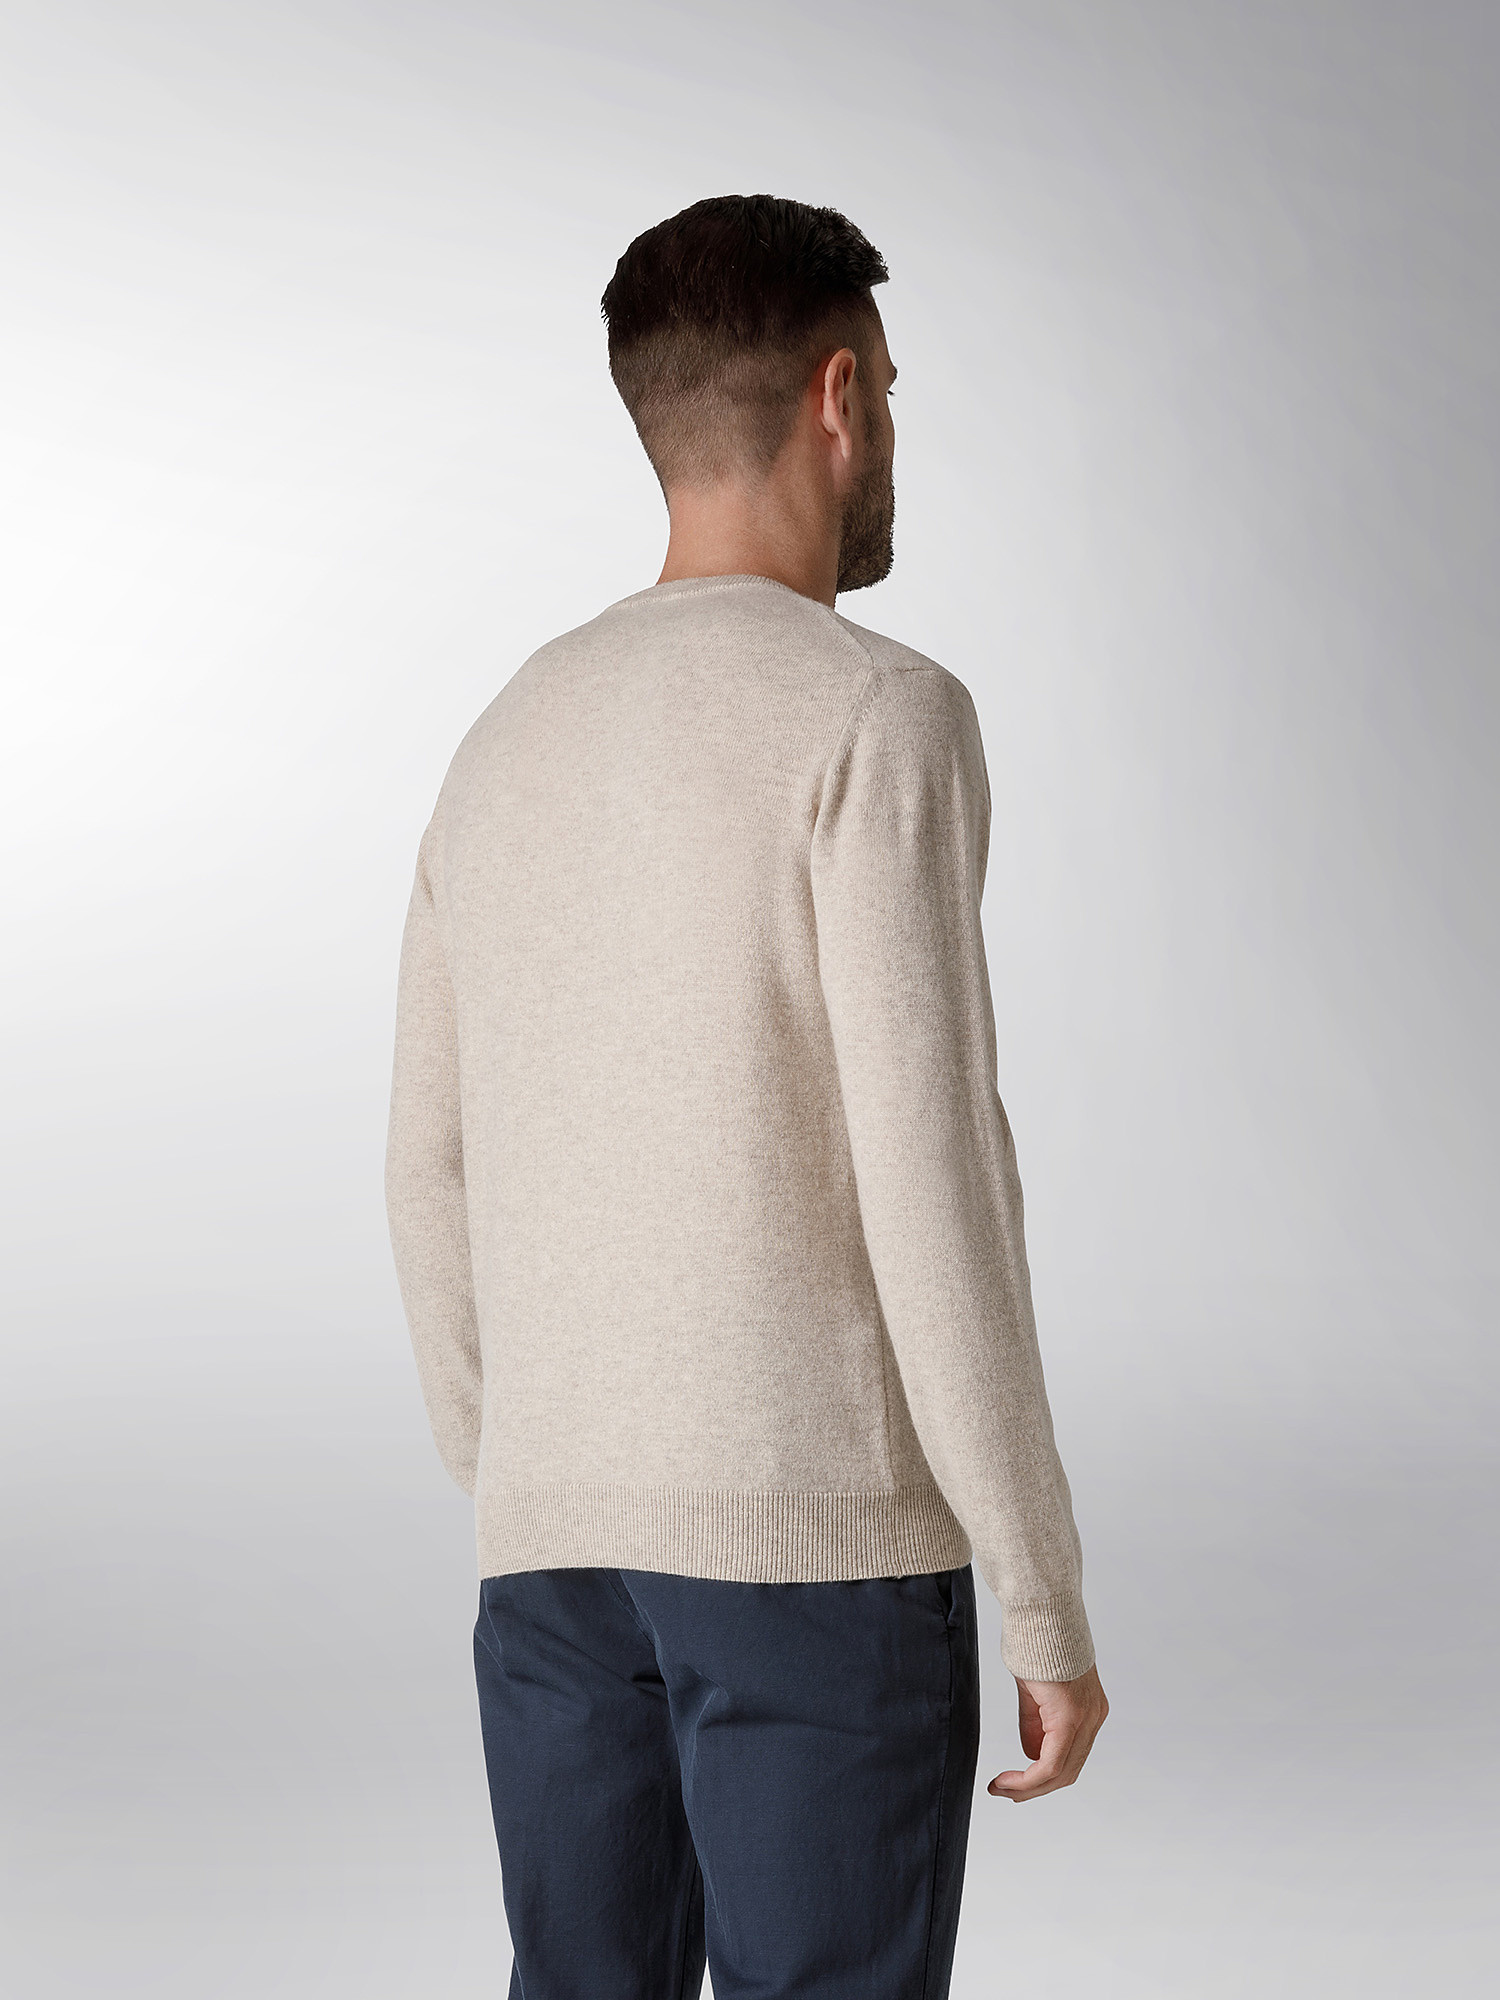 Coin Cashmere - Crewneck sweater in pure cashmere, Beige, large image number 2